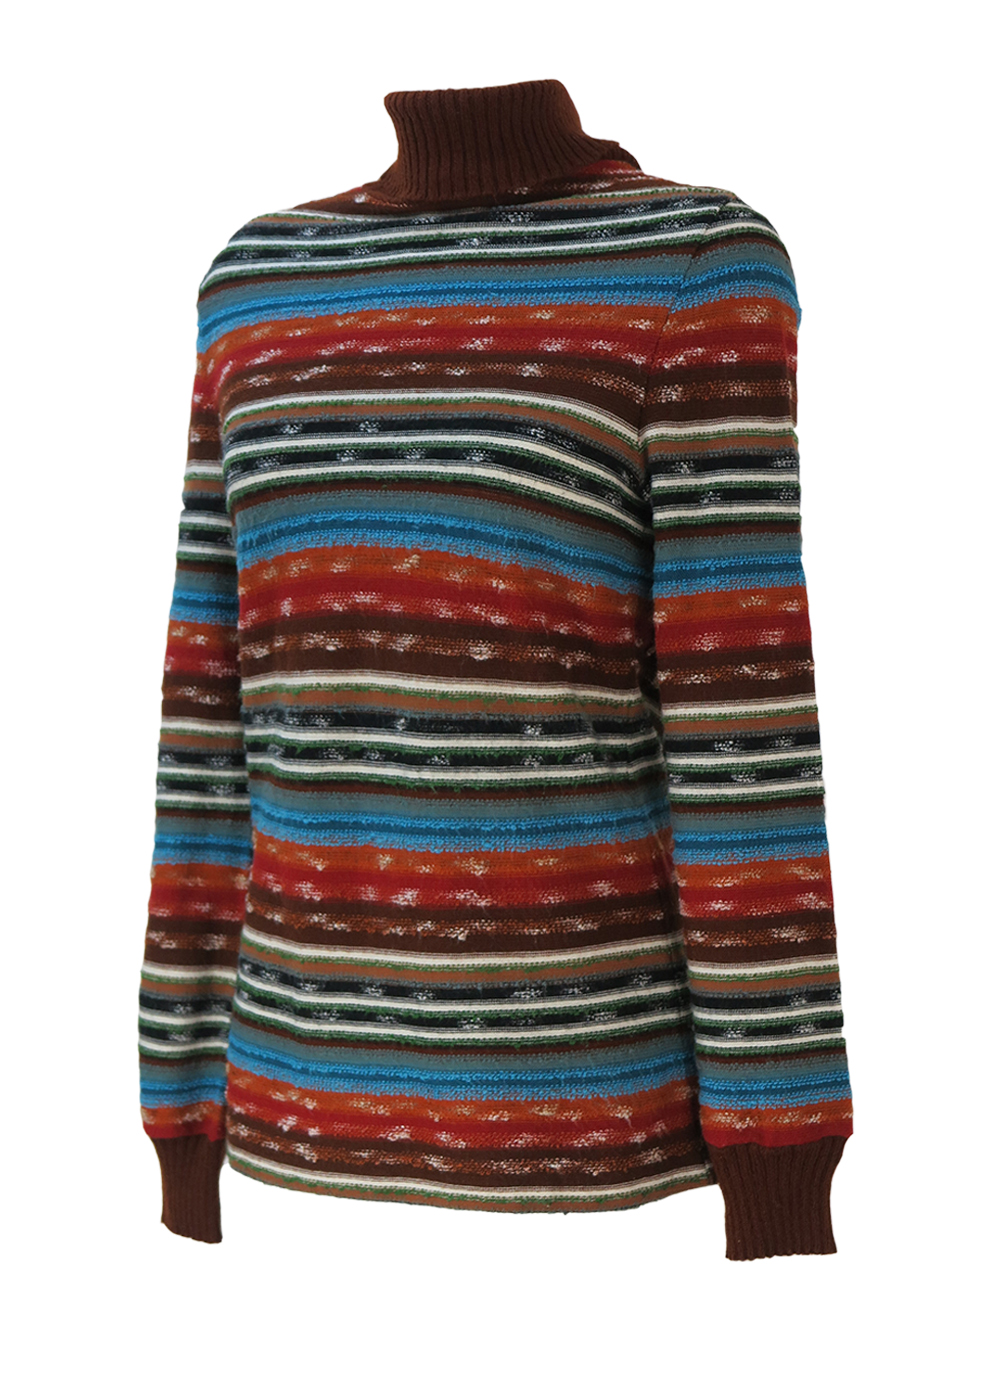 Vintage 70's Roll Neck Jumper with Striped Pattern in Brown, Red ...